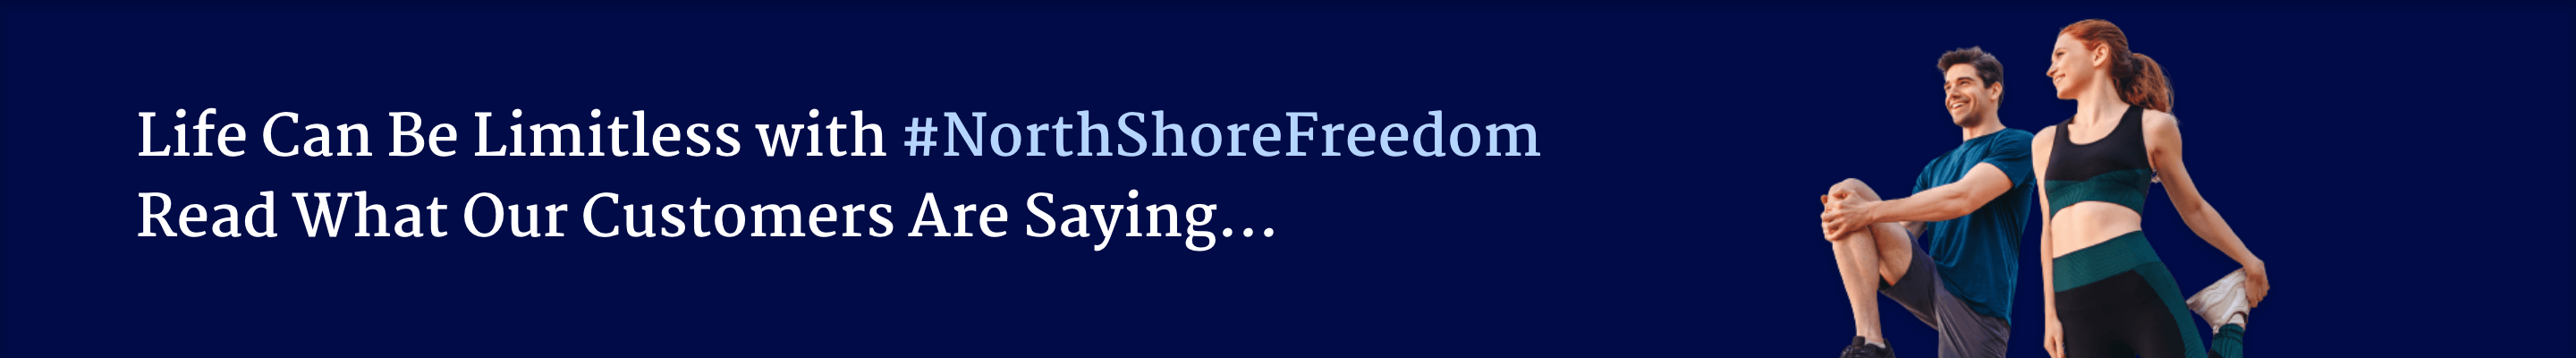 Life Can Be Limitless with #NorthShoreFreedom Read what our customers are saying...